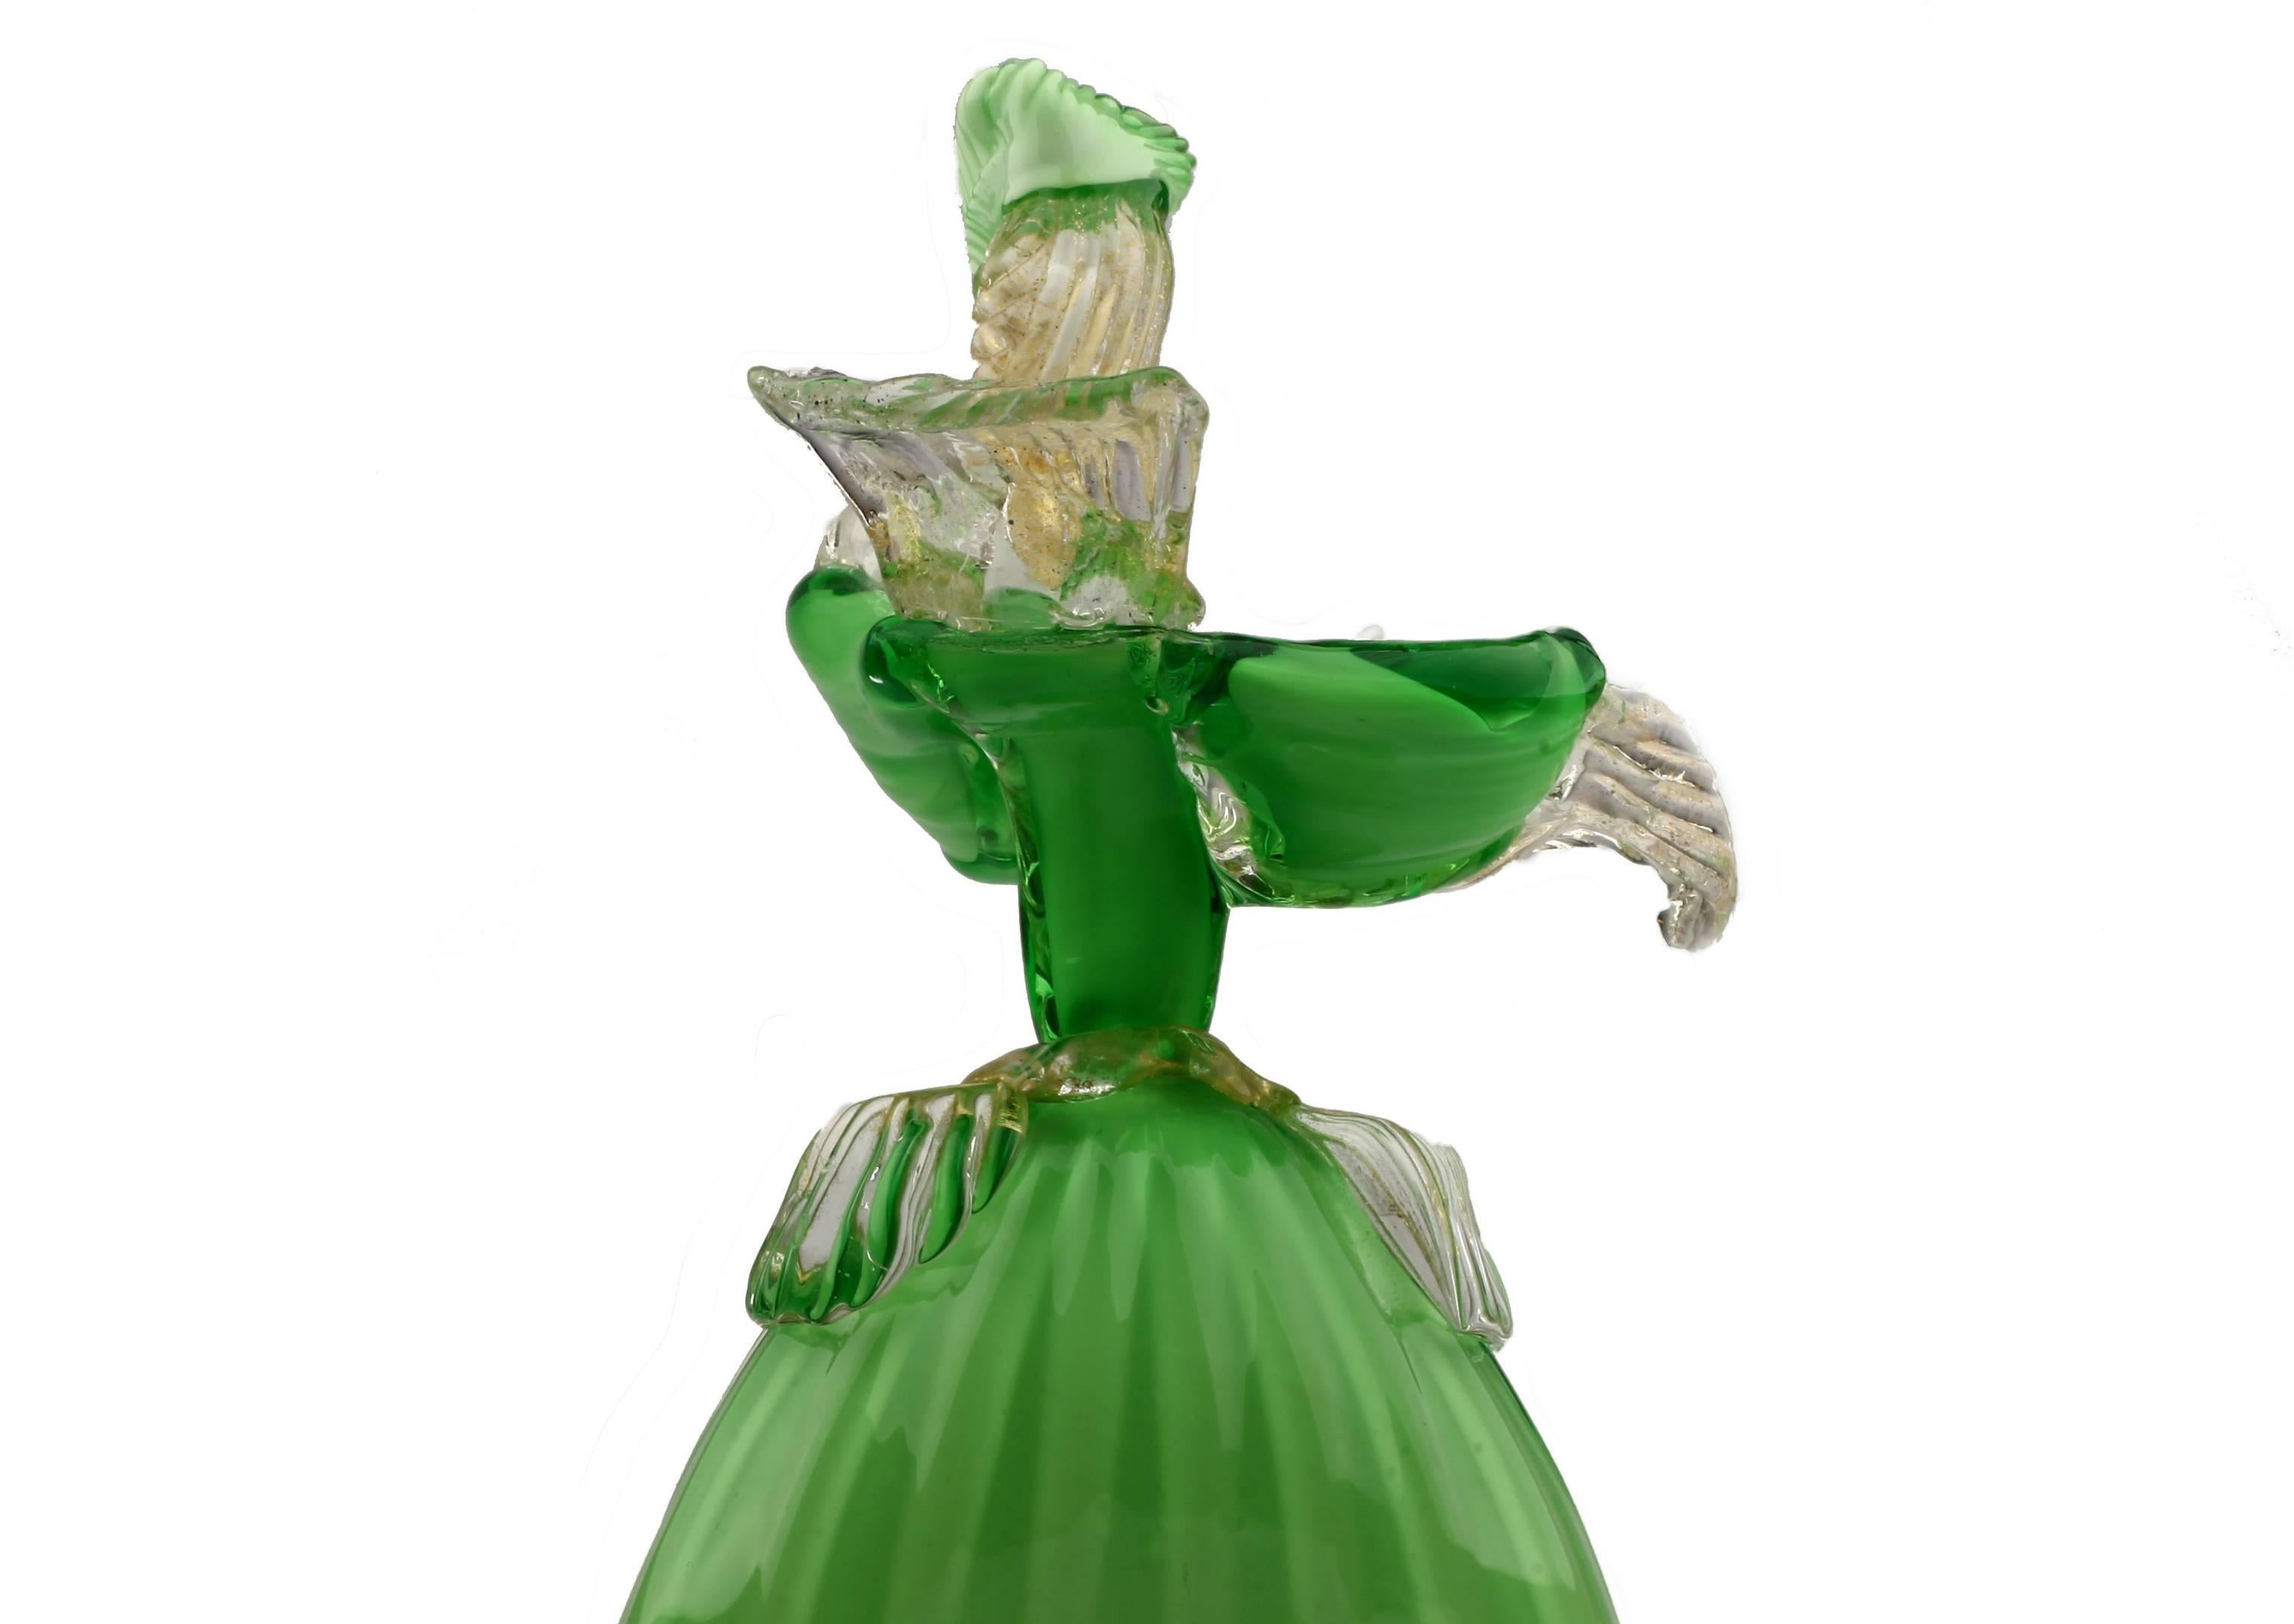 Italian Formia Murano Glass Figurine of a Lady in Lavish and Elaborate Costume In Excellent Condition For Sale In Waverveen, Utrecht